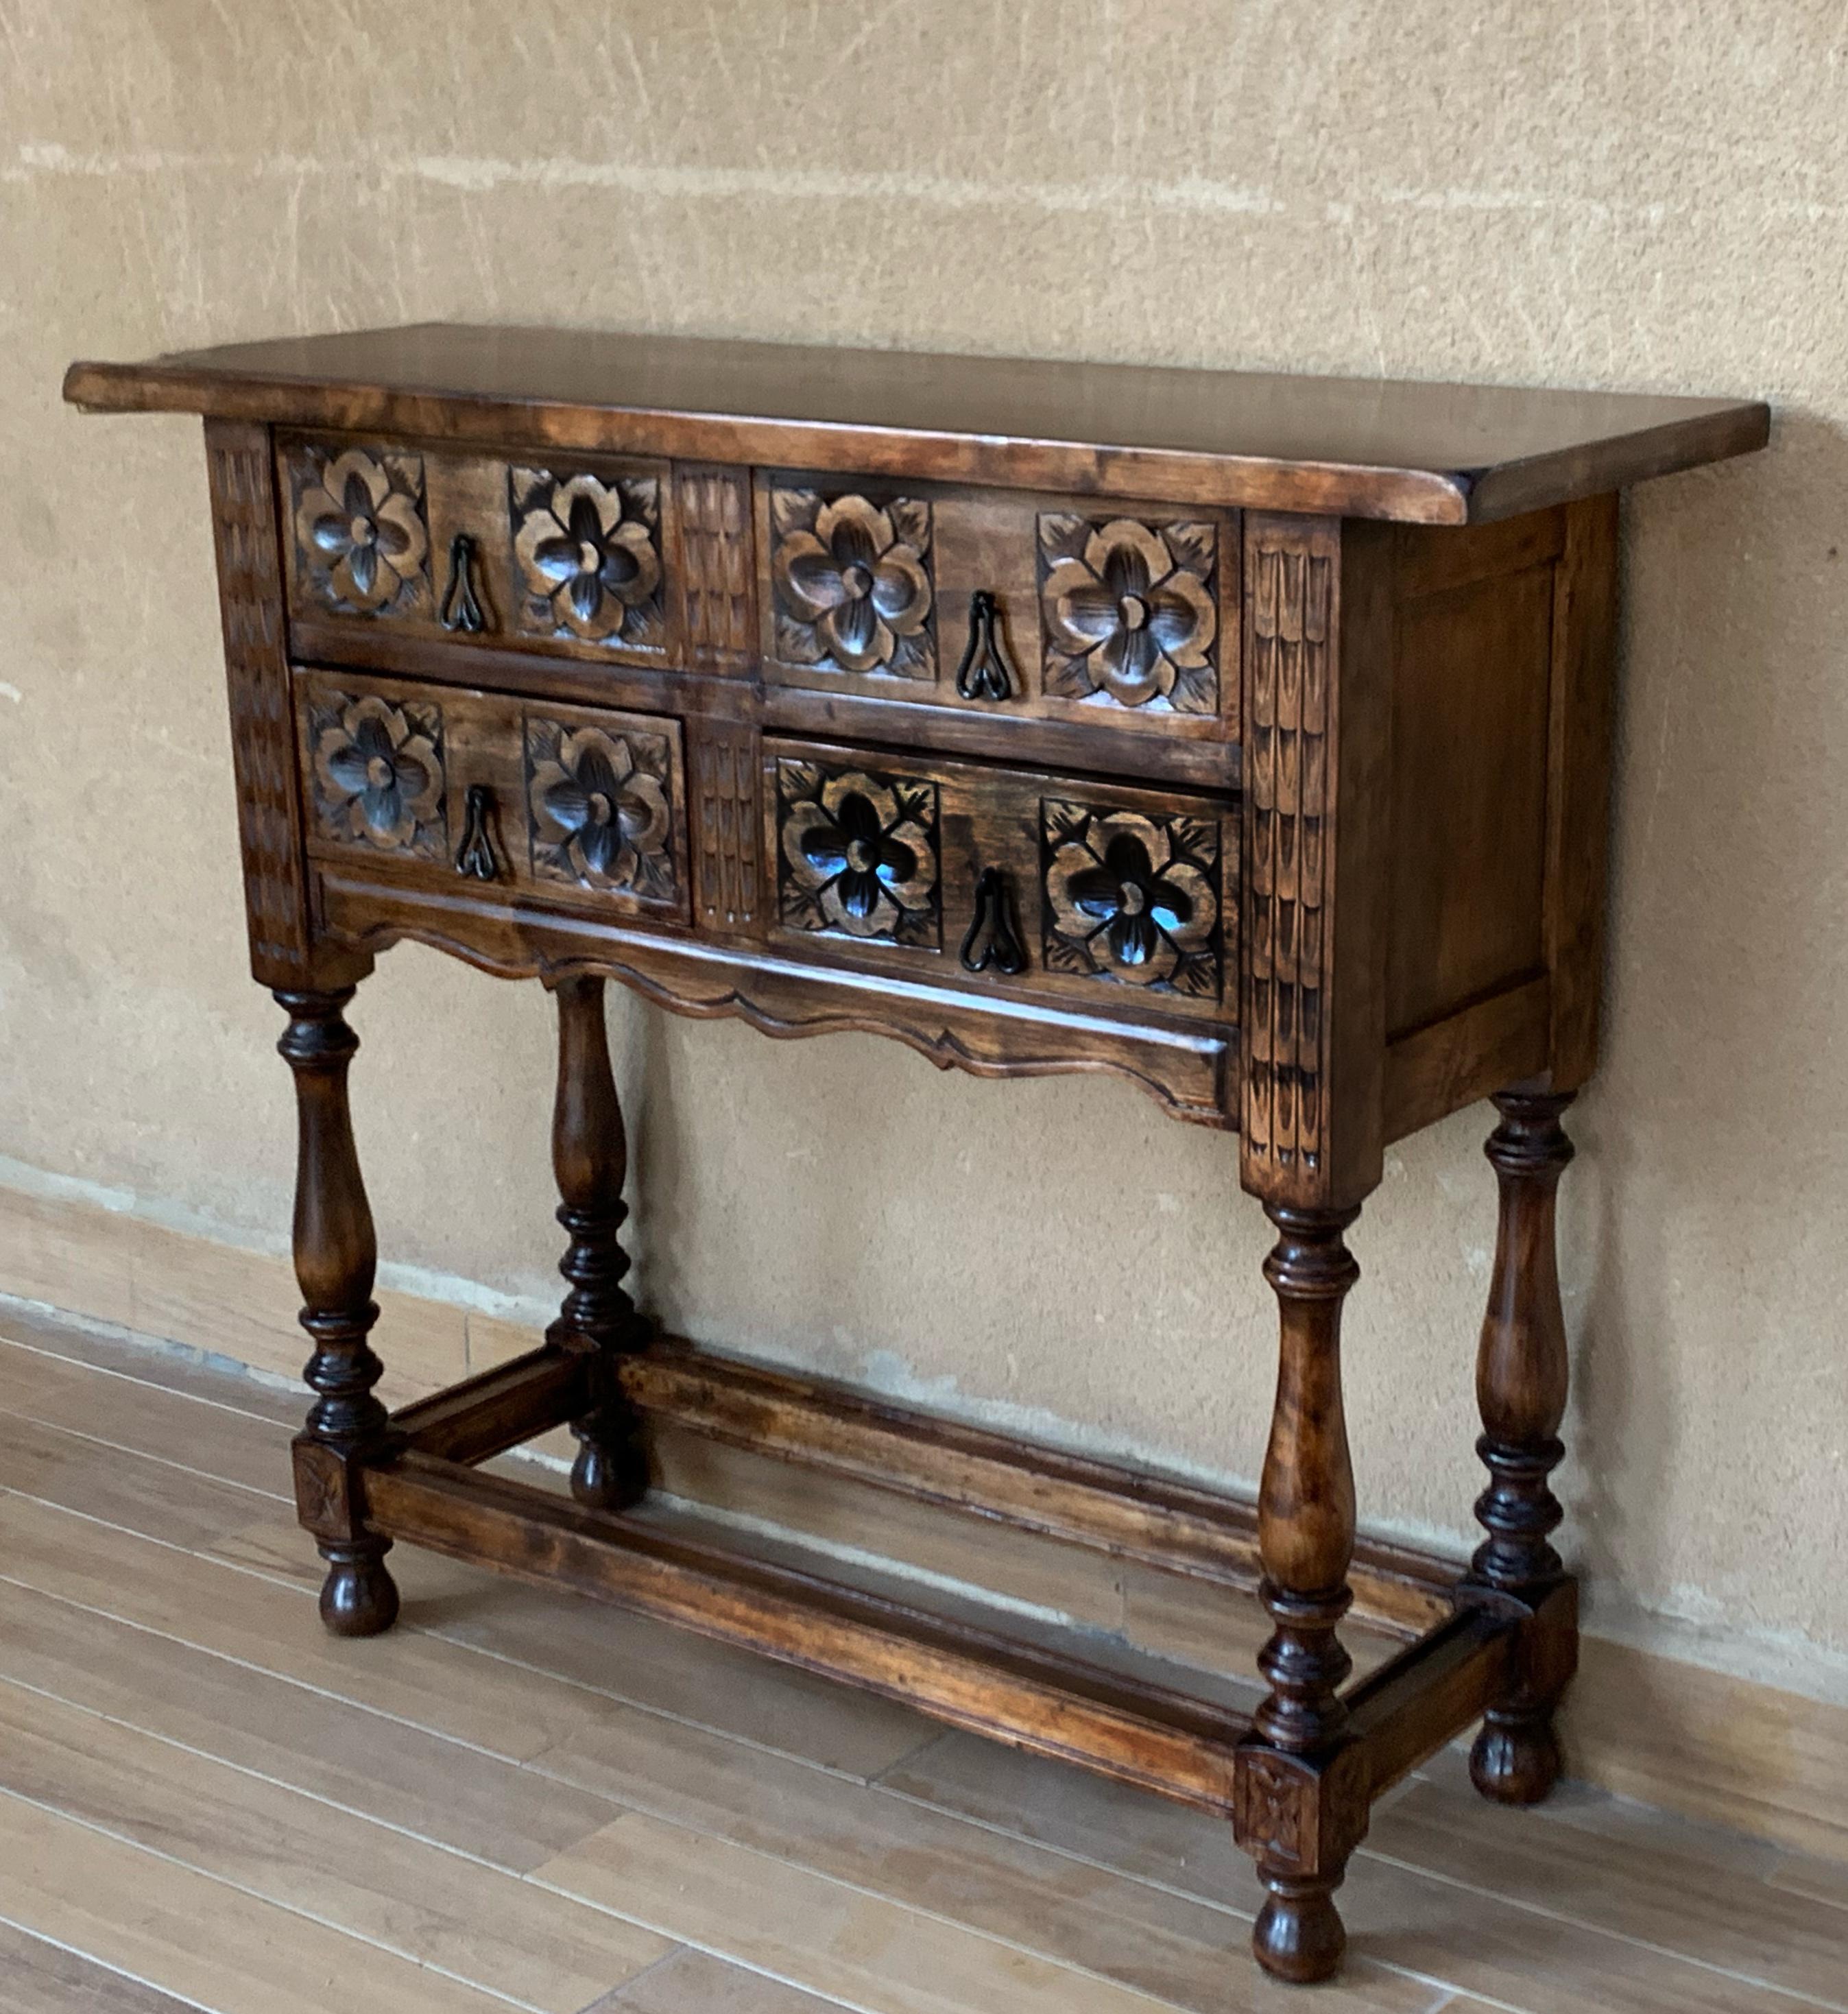 Baroque Revival 19th Century Catalan Spanish Carved Walnut Console Sofa Table, Three Drawers